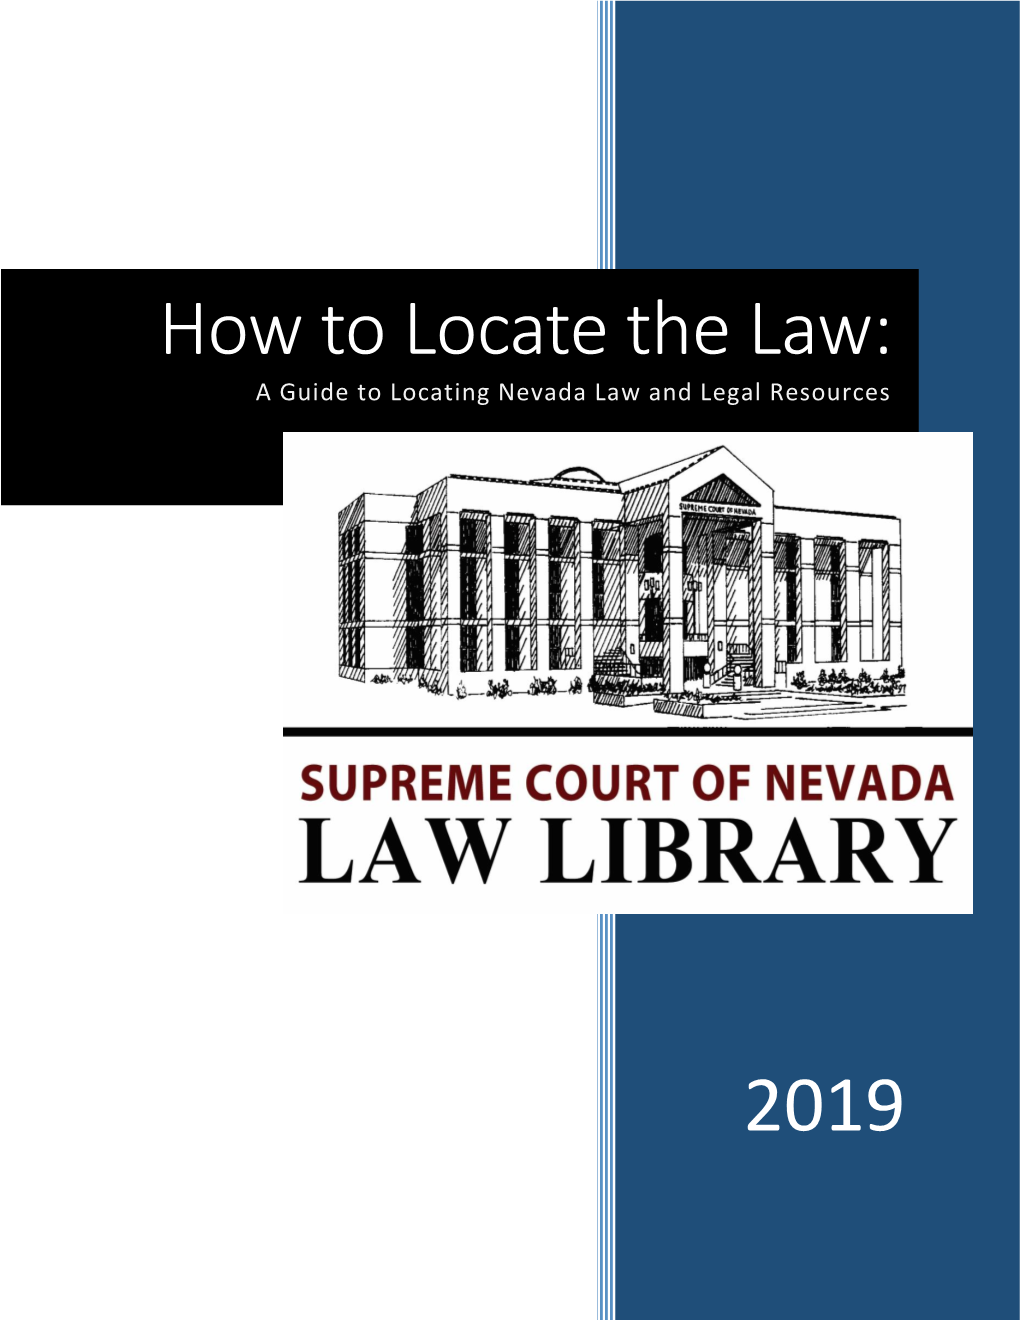 A Guide to Locating Nevada Law and Legal Resources